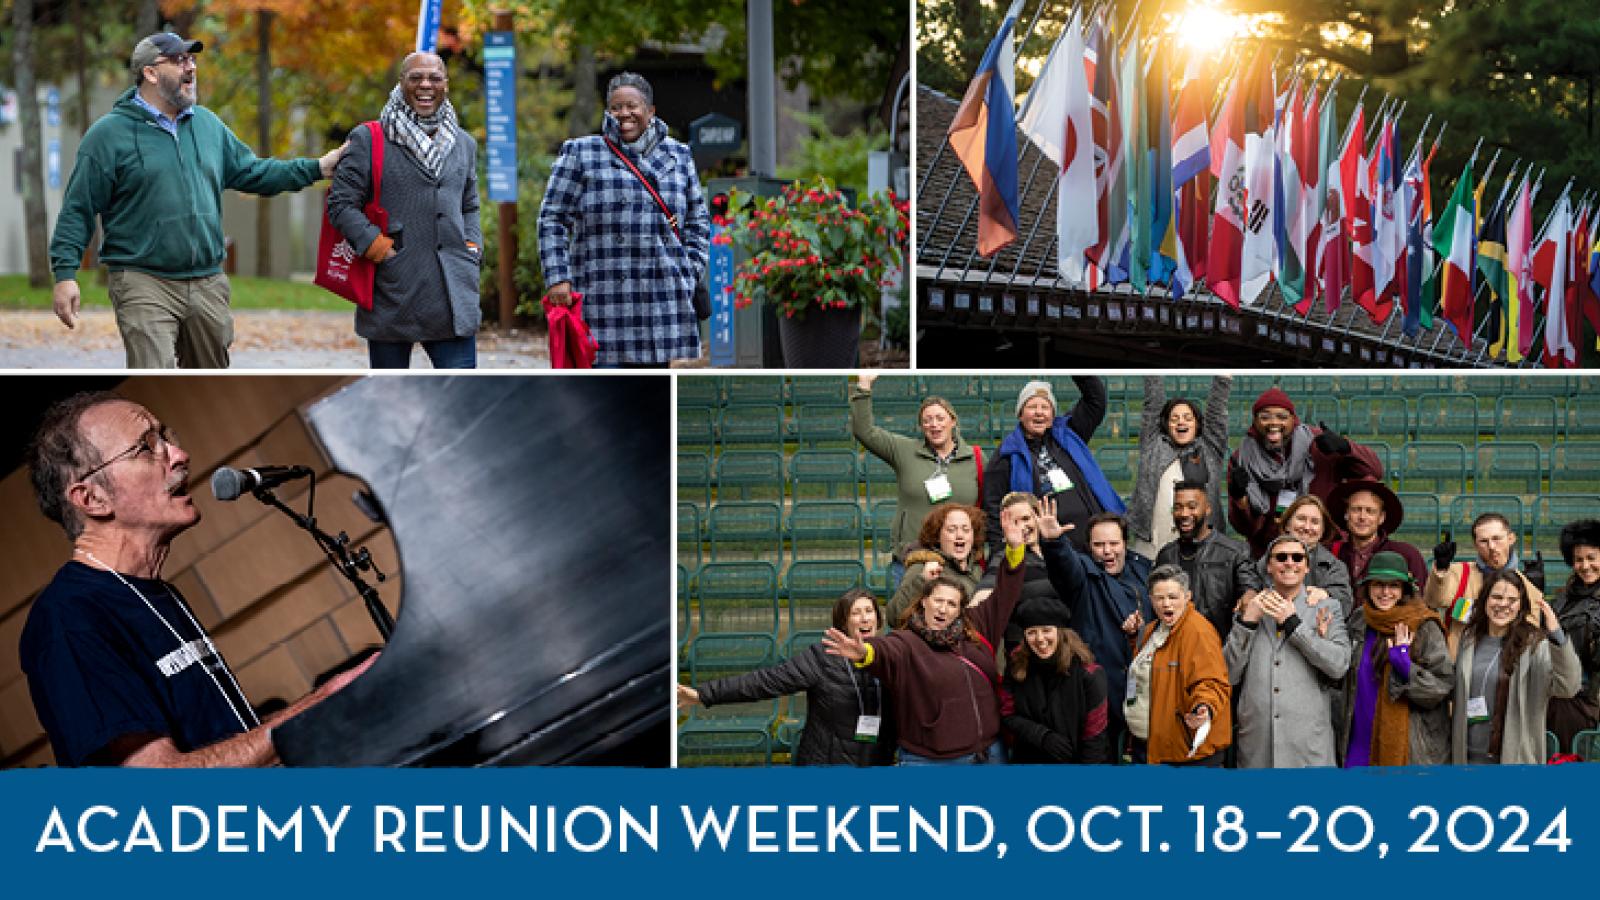 A collage of four images including the flags over Kresge Auditorium at sunset and alumni gathering, performing, and celebration on Interlochen's campus with the words: Academy Reunion Weekend 2024, Oct. 18-20, 2024